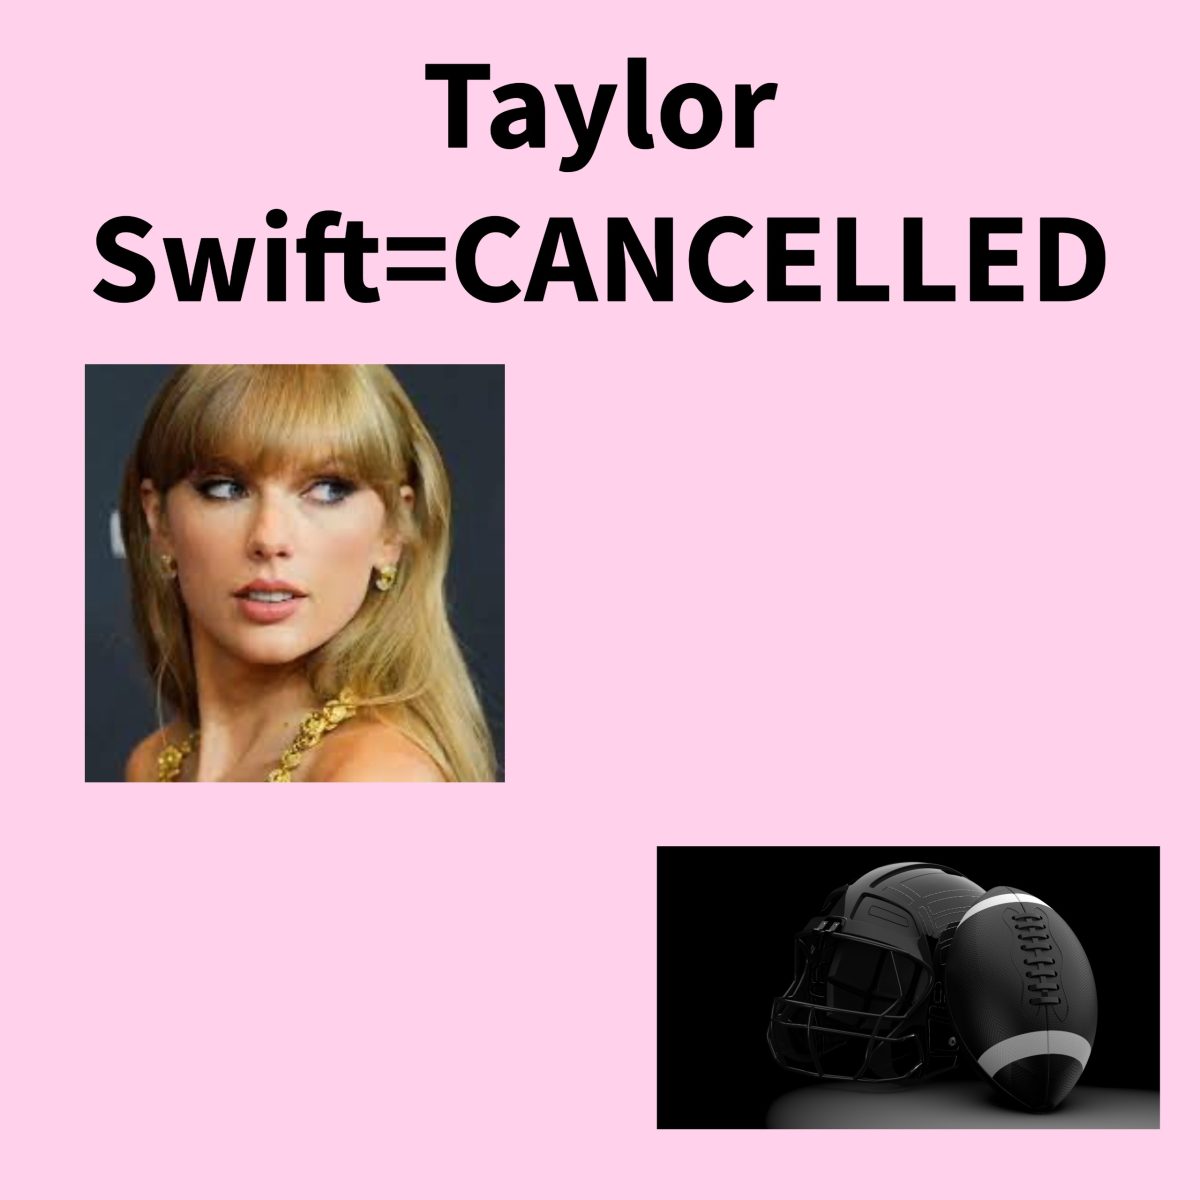 It is time to cancel Taylor Swift!